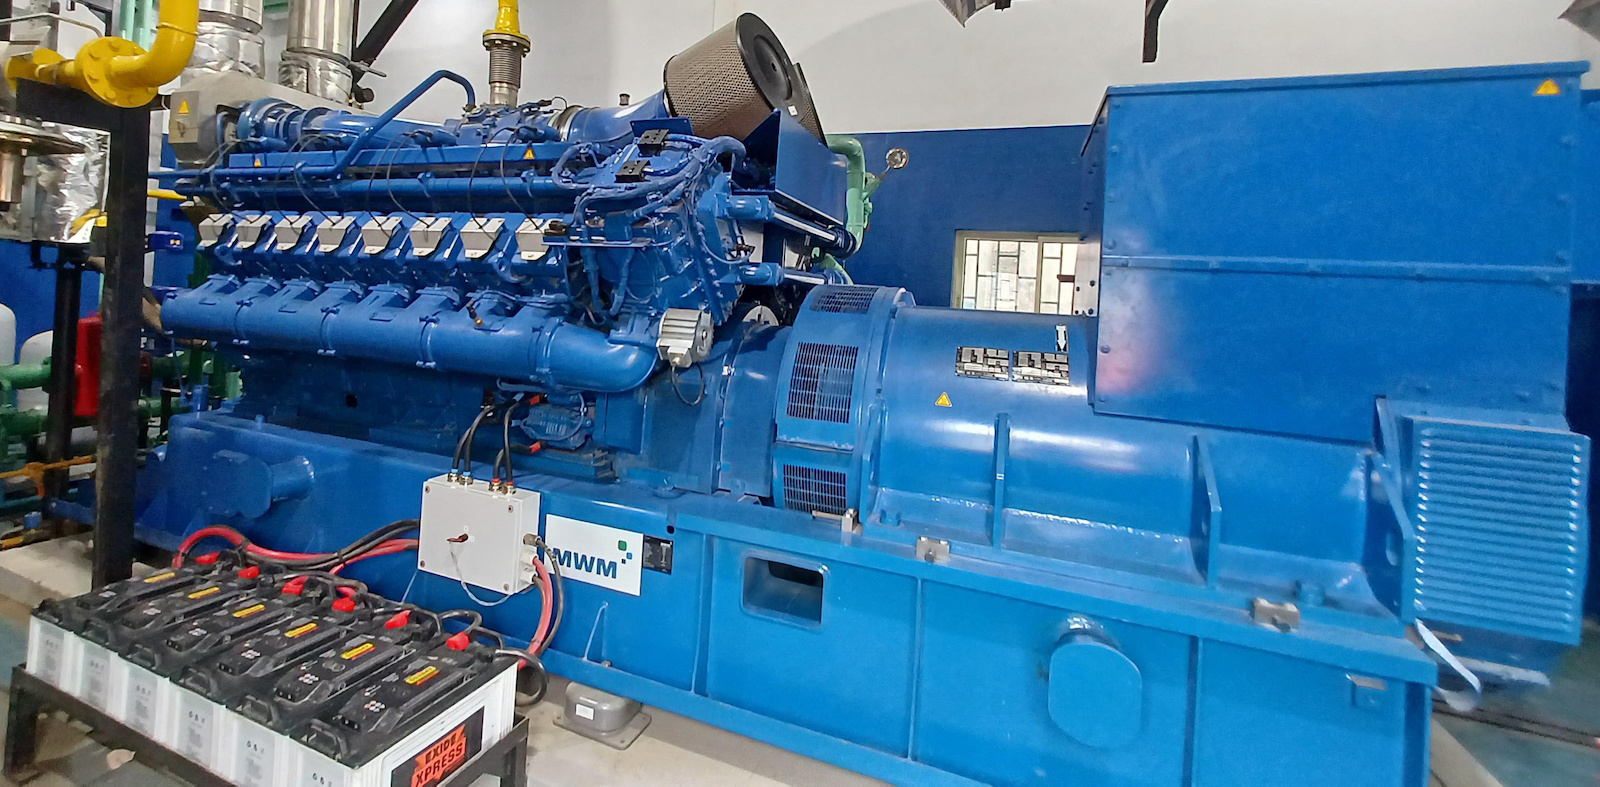 Along with the MWM TCG 2020 V12 K1 gas engine, the MWM TCG 3020 V16 gas engine installed by Green Power International produces energy for the Panar Group of Companies. 